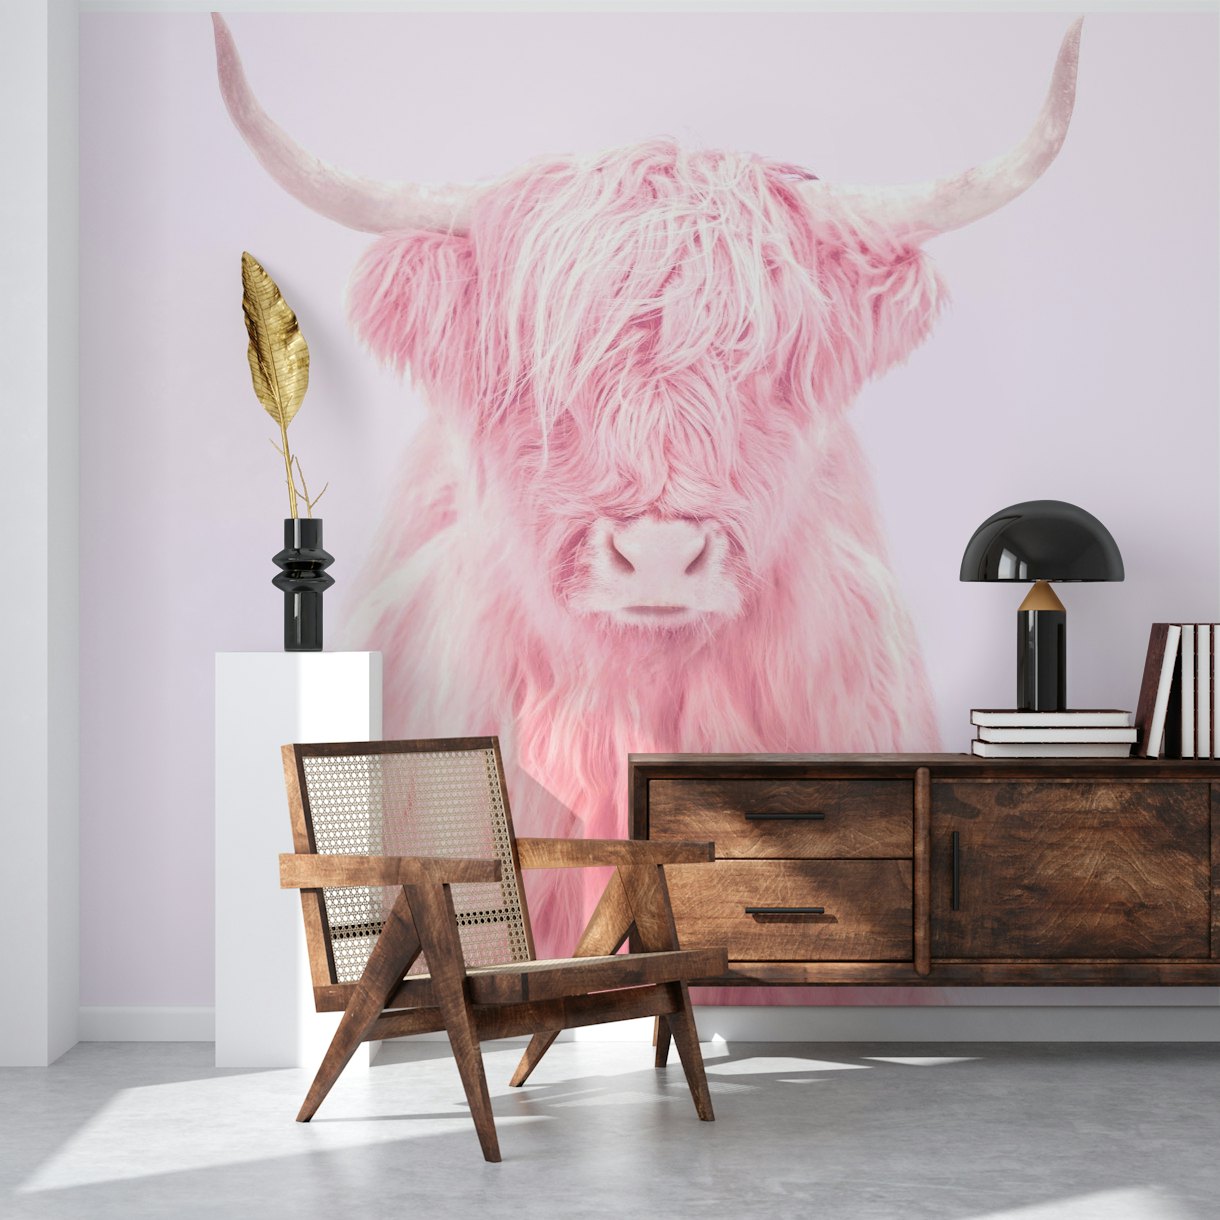 Highland Cow Wallpaper Mural with Aesthetic and Unique Design